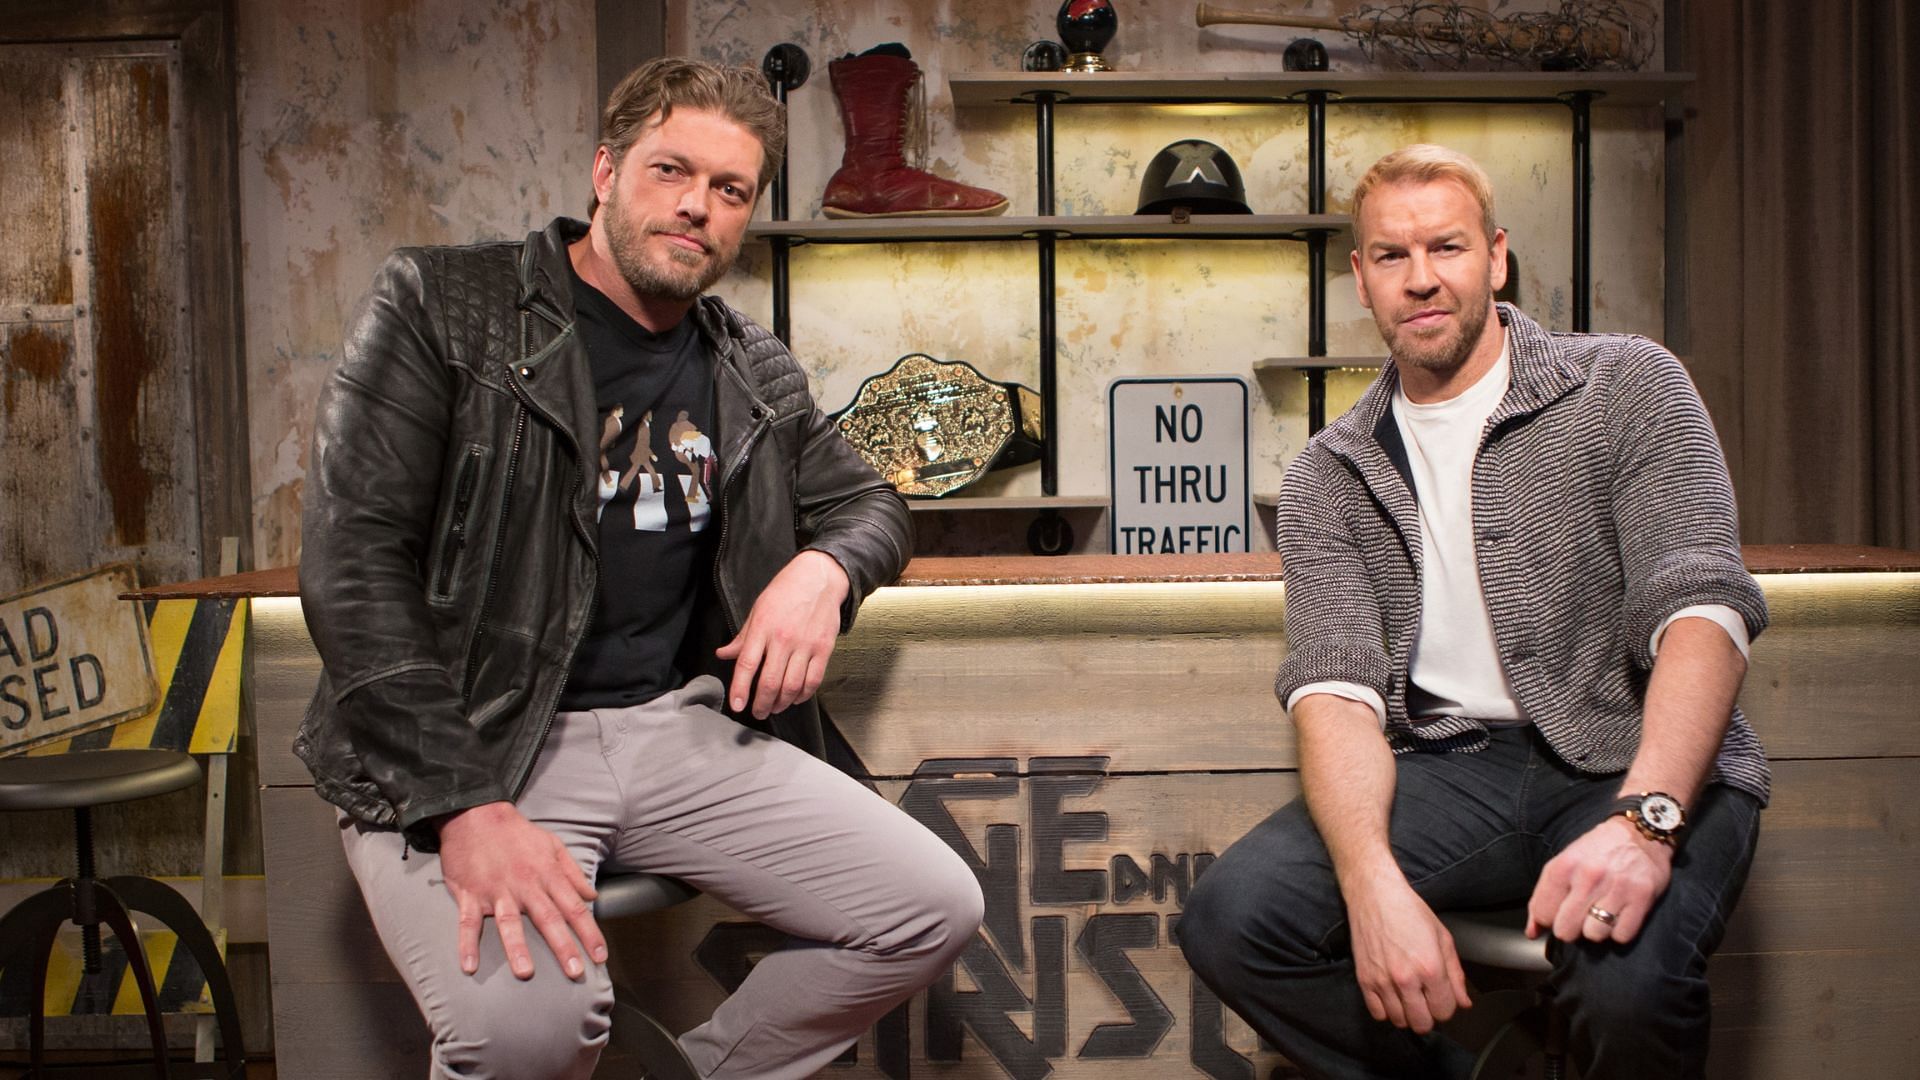 Could this duo take the mantle from Edge and Christian?